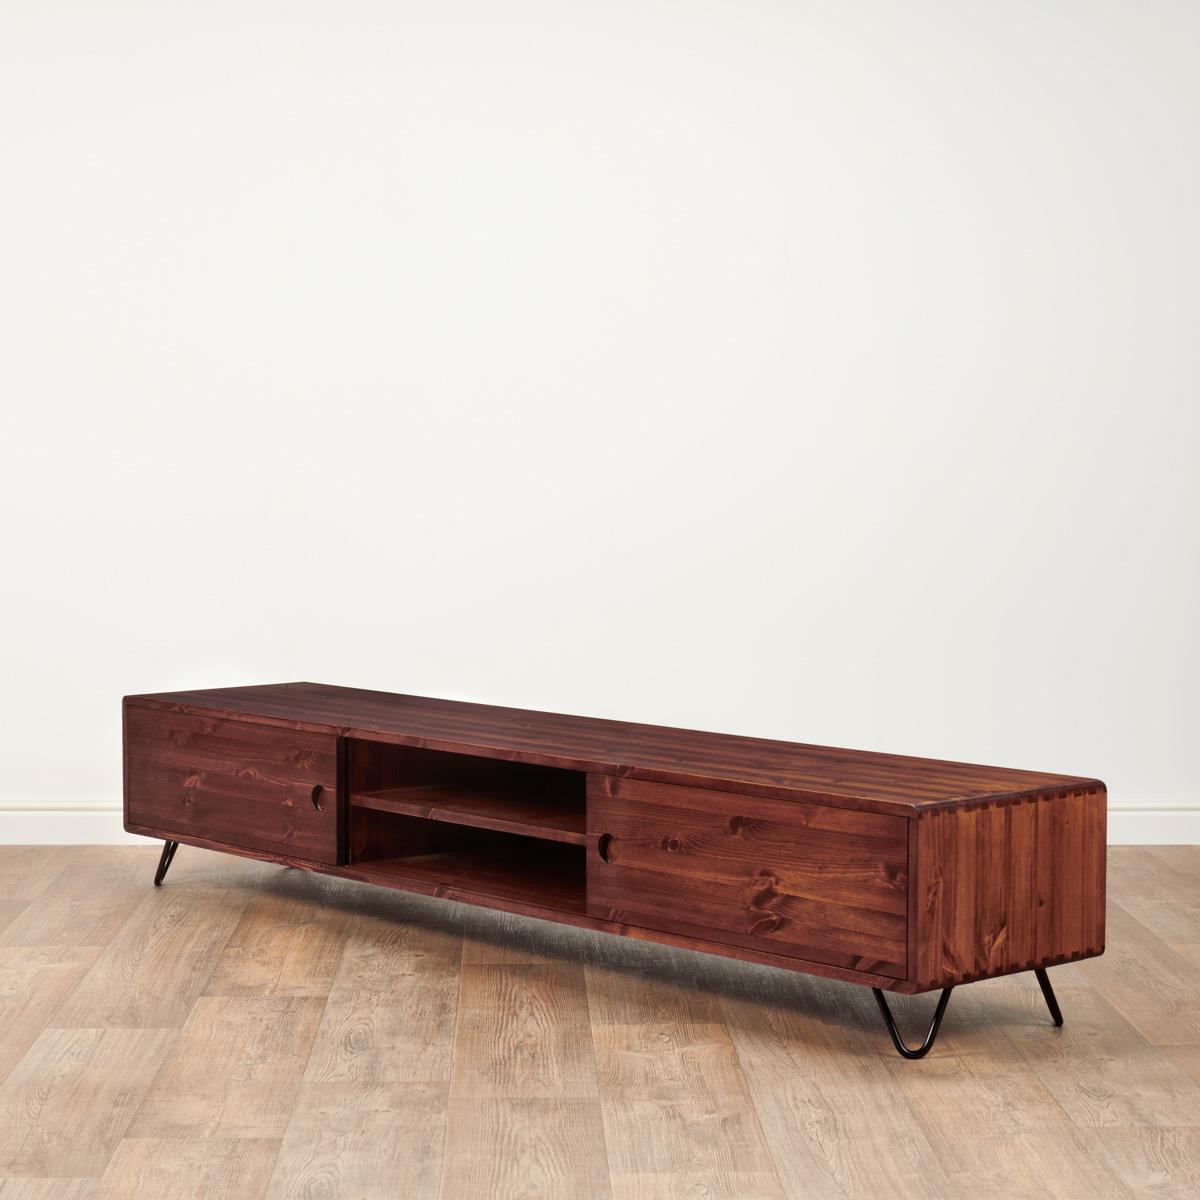 Low Tv Unit | 200/220Cm Wide | Extra Long |With Storage